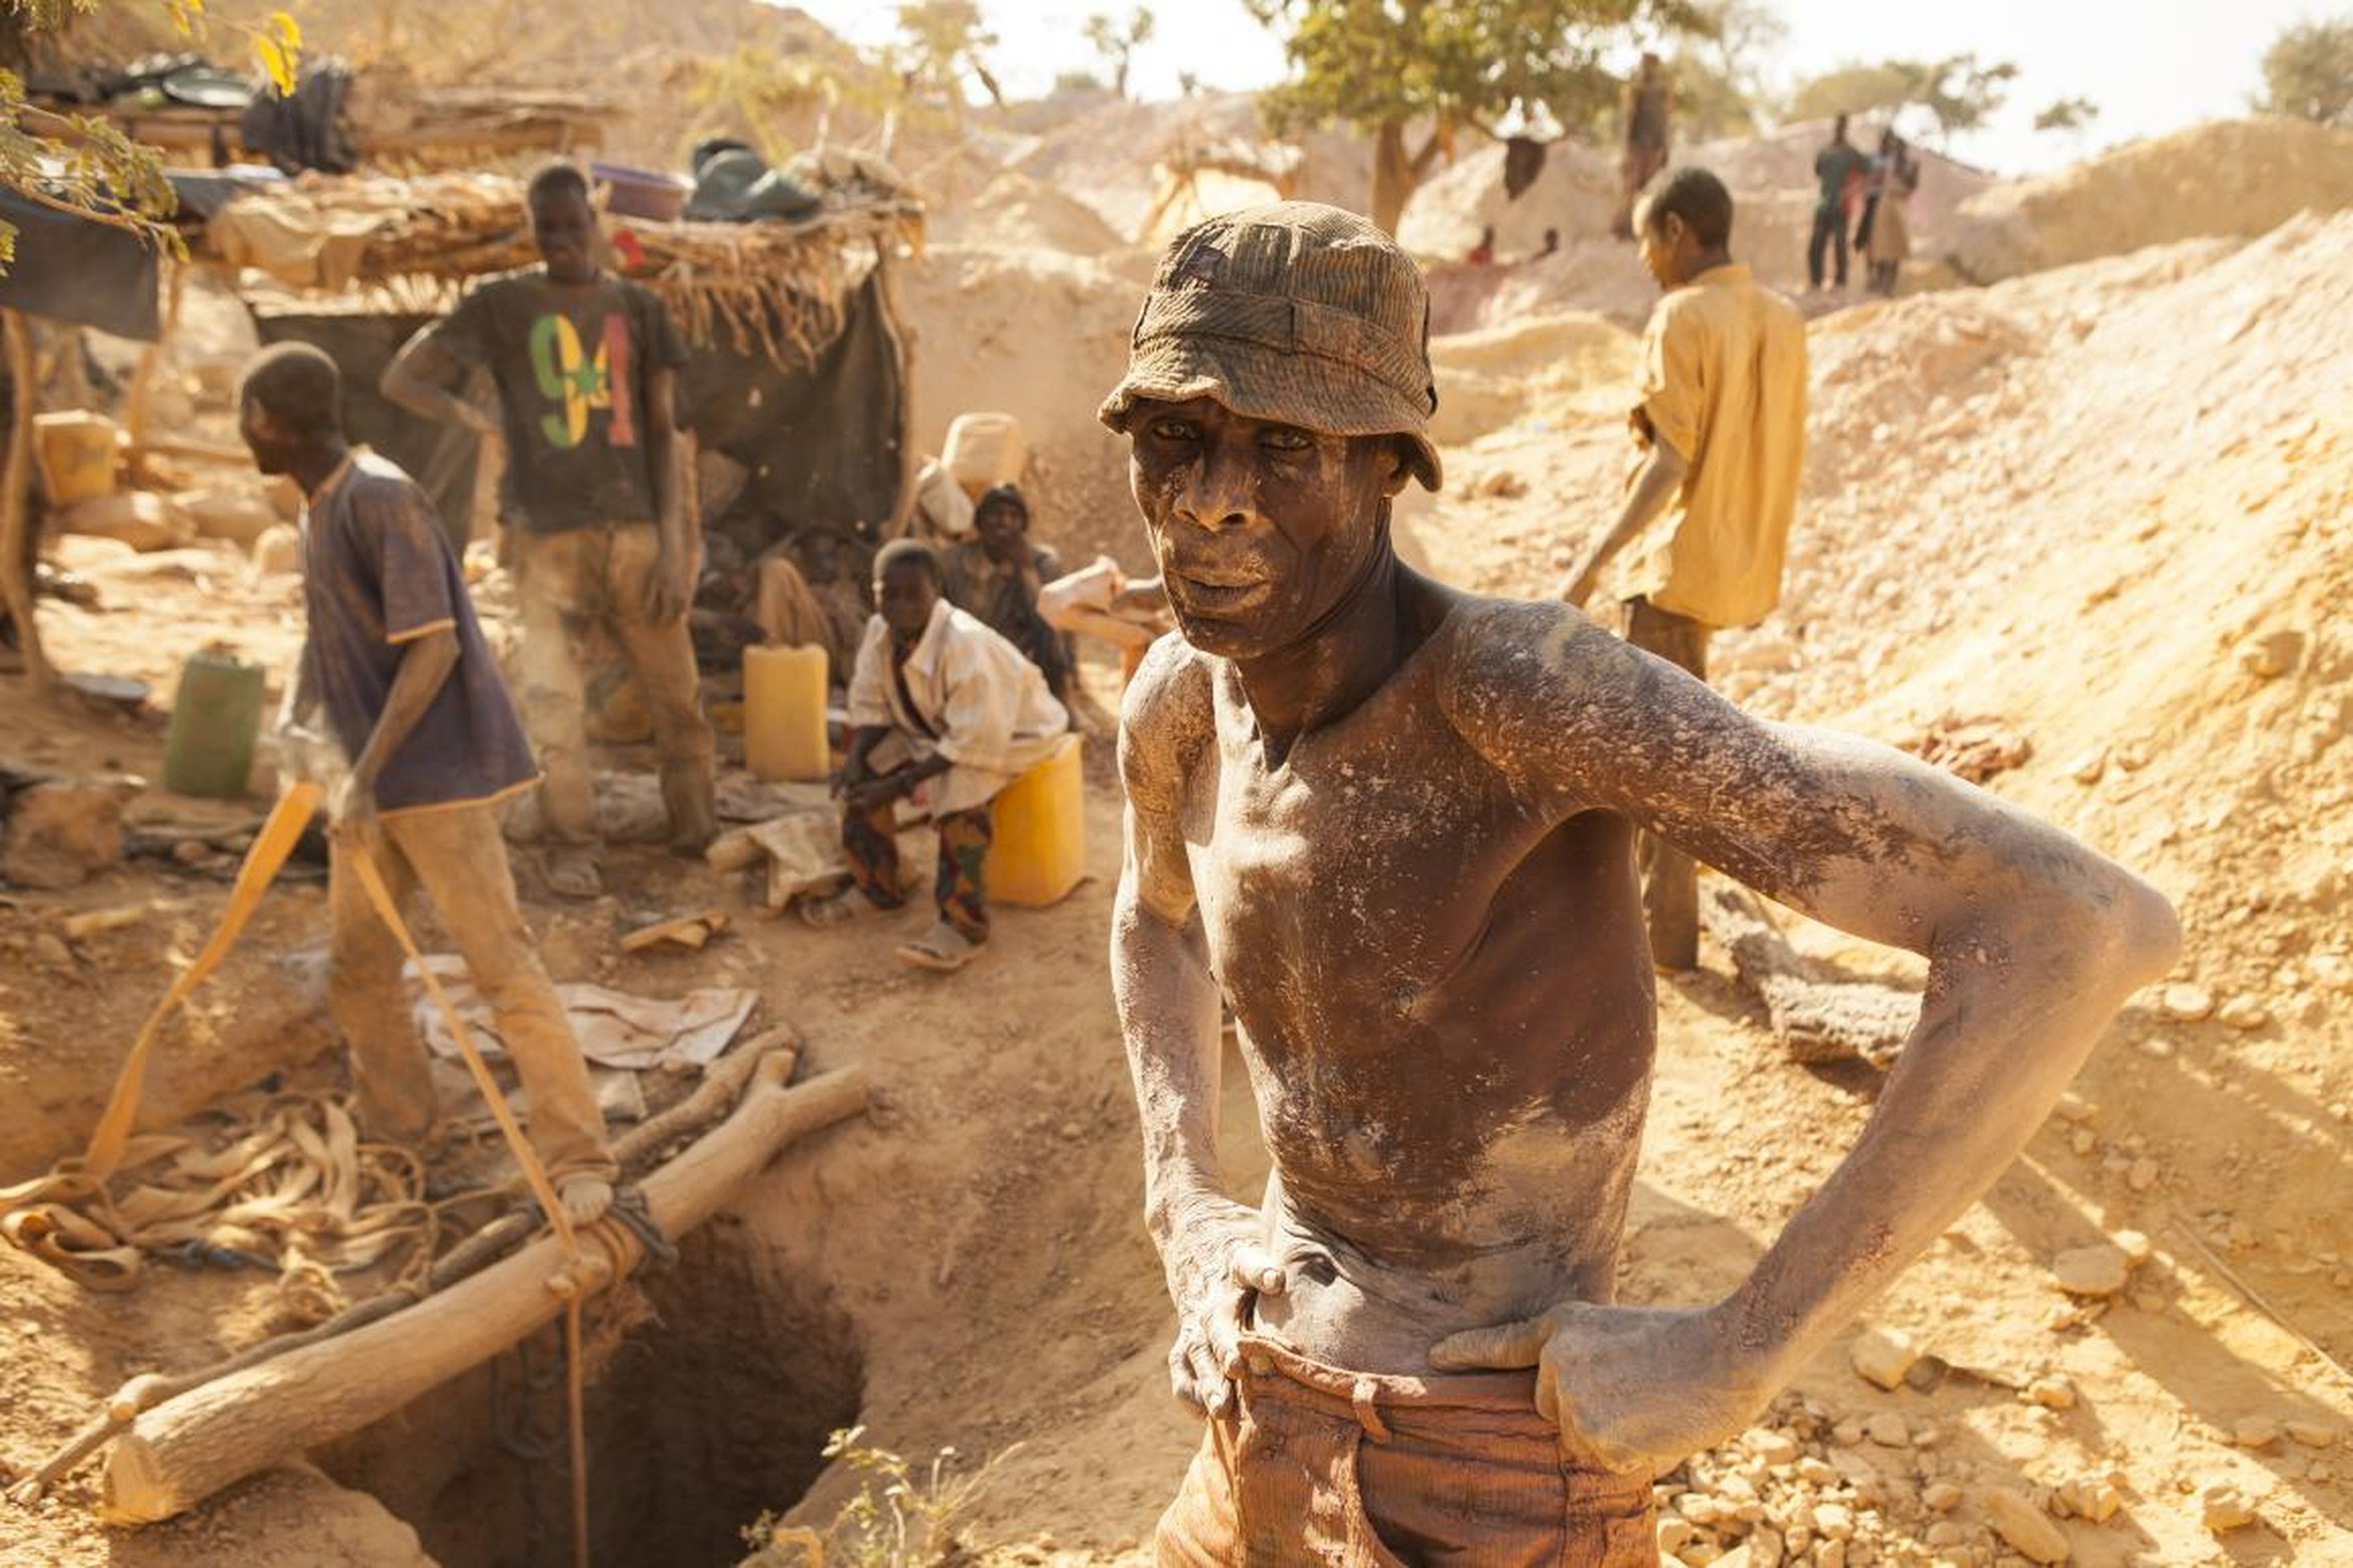 5. This artisanal gold site in Burkina Faso was home to around 10,000 people when Brown visited in 2010. "In this part of Africa, extraordinary gold rushes can appear out of nowhere and then disappear just as quickly as other